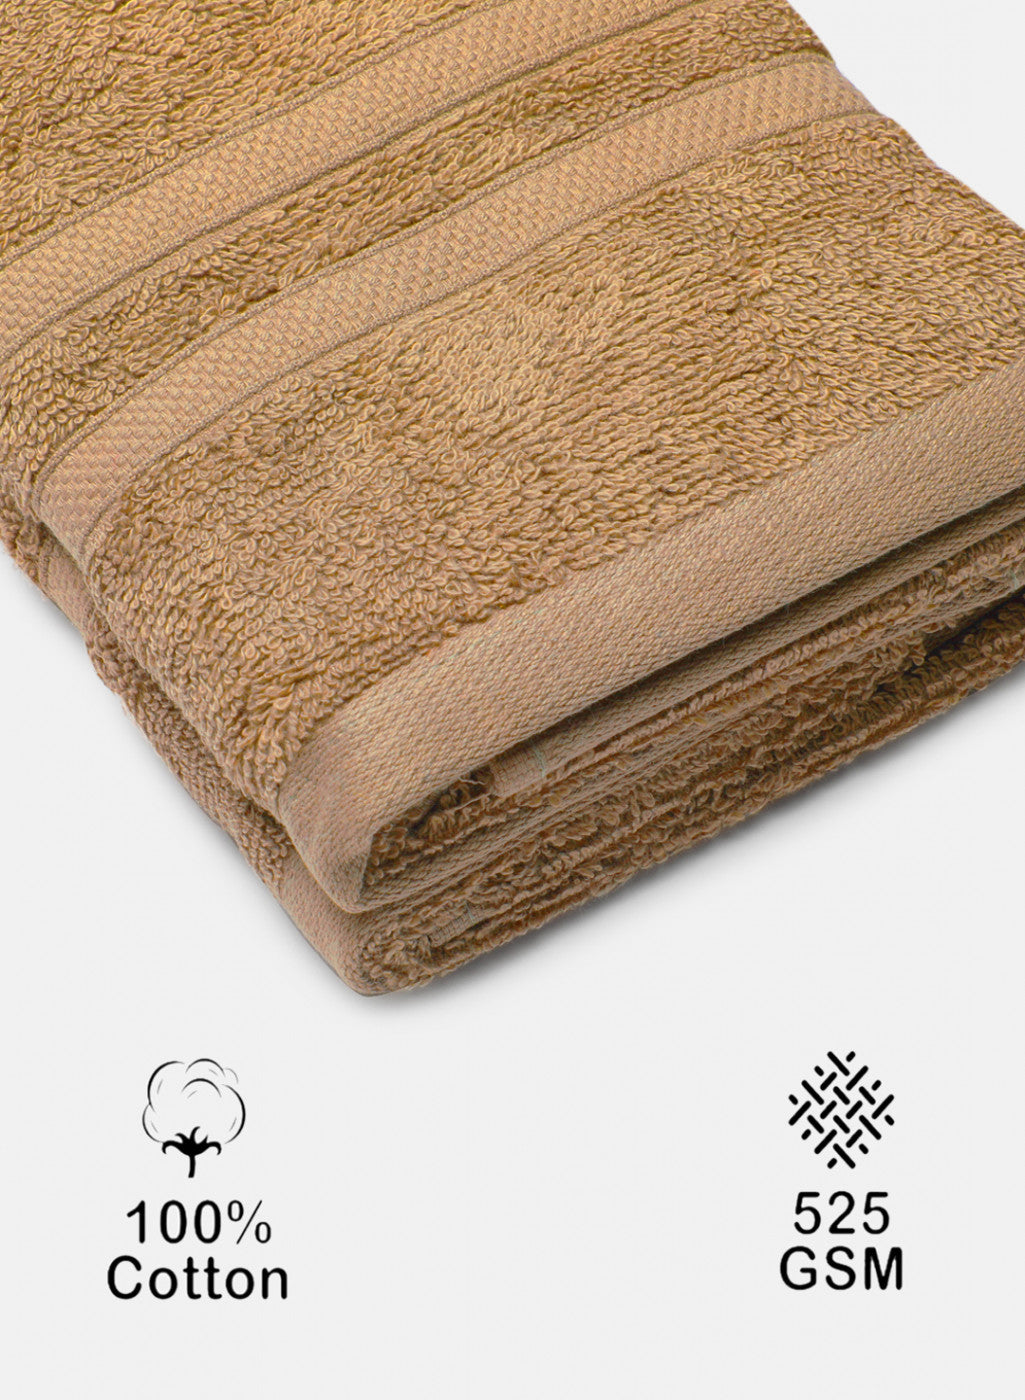 Beige Cotton 525 GSM Hand Towels (Pack of 2)